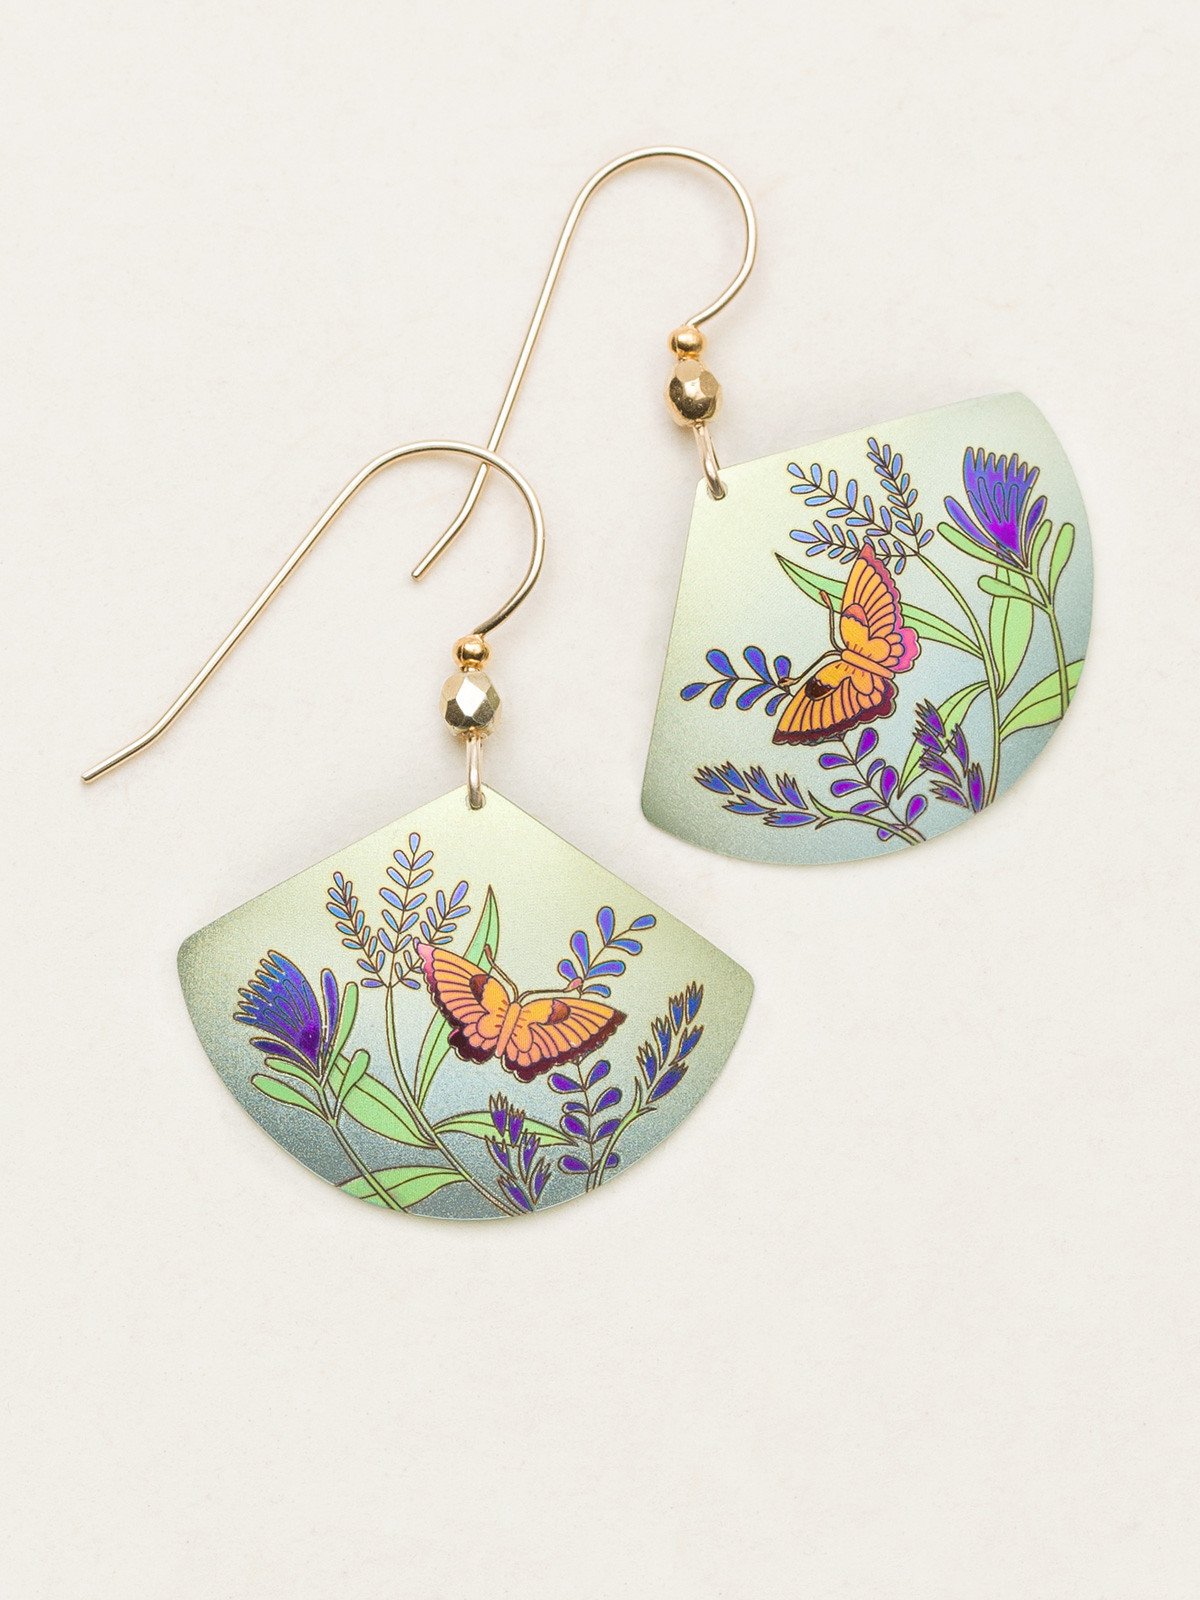 Garden Whimsy Earrings by jewelry designer Holly Yashi